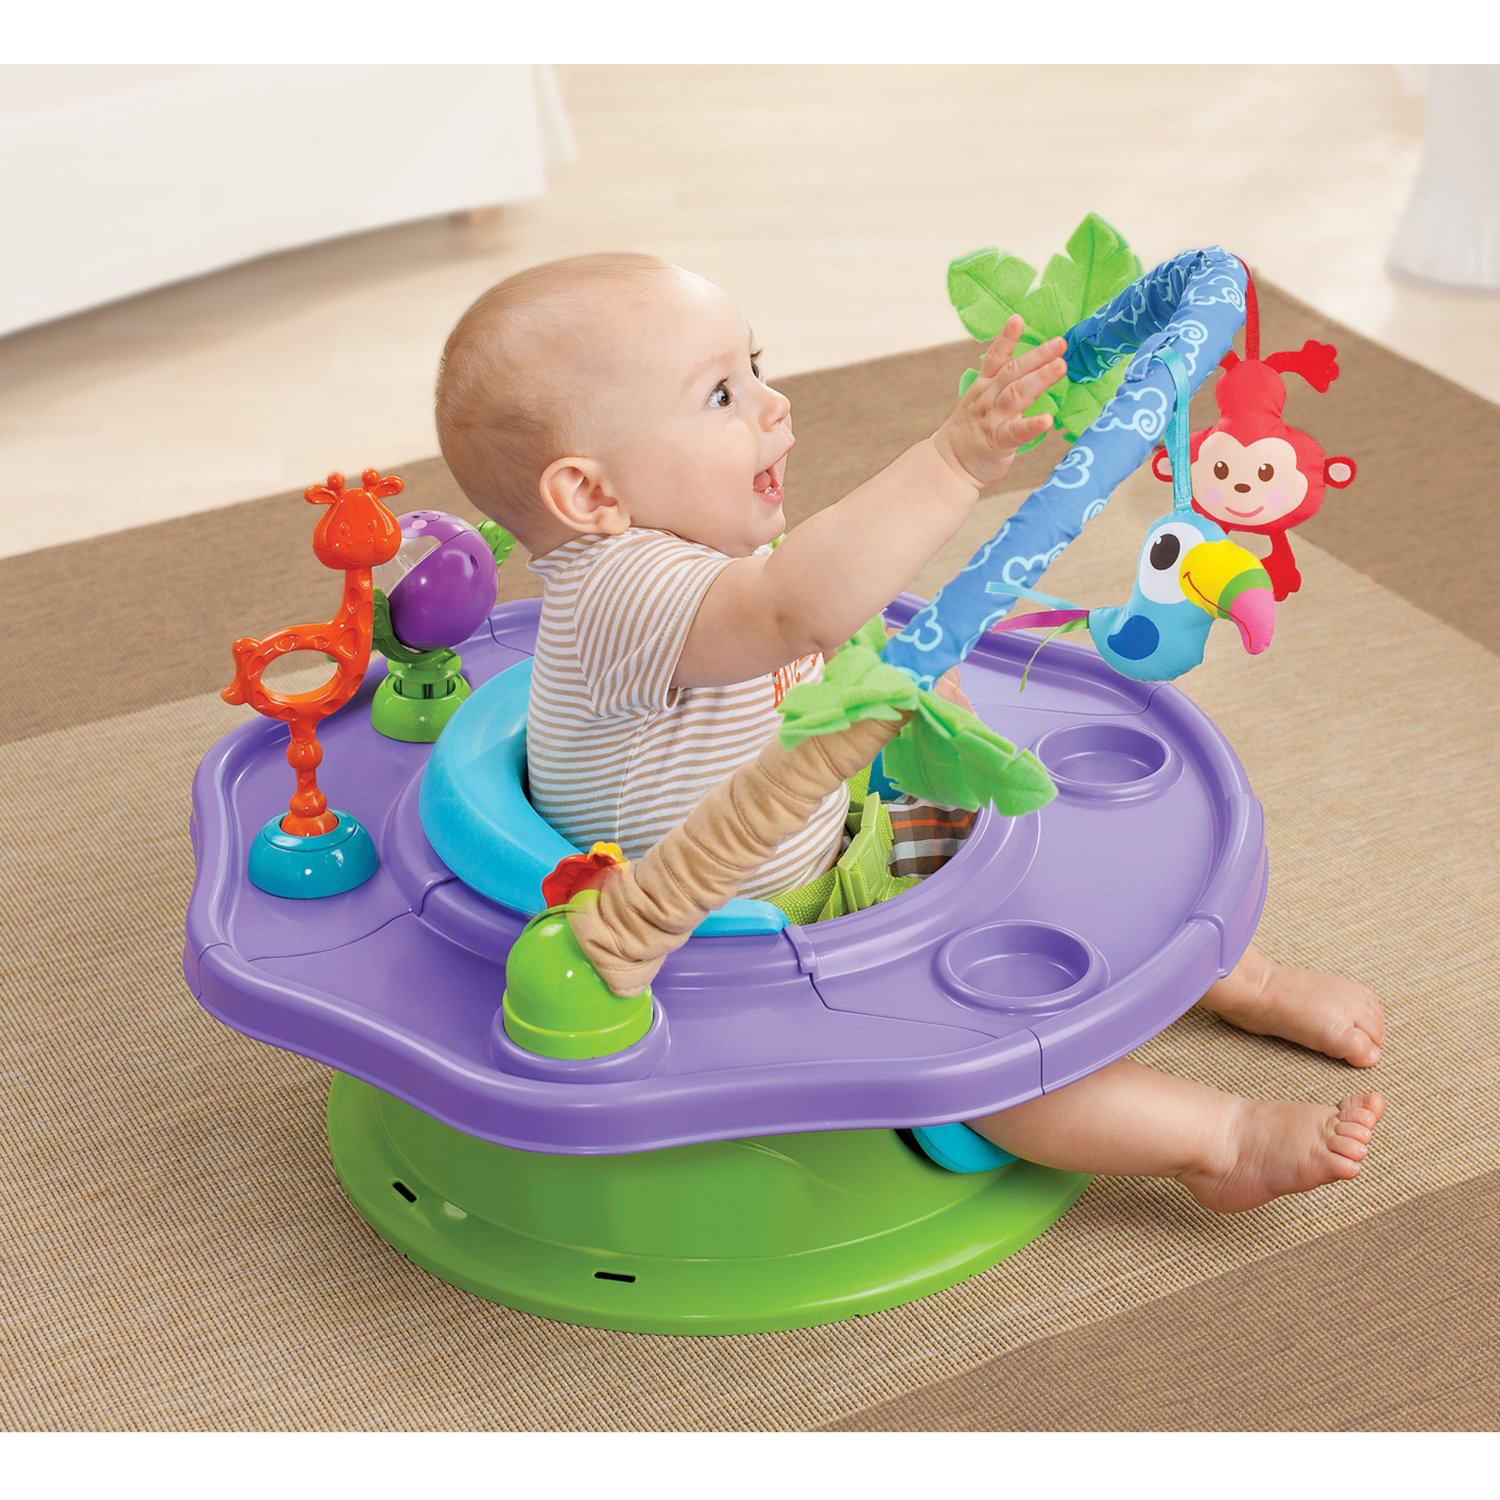 Summer Infant Island Giggles Deluxe SuperSeat, Neutral - image 5 of 8